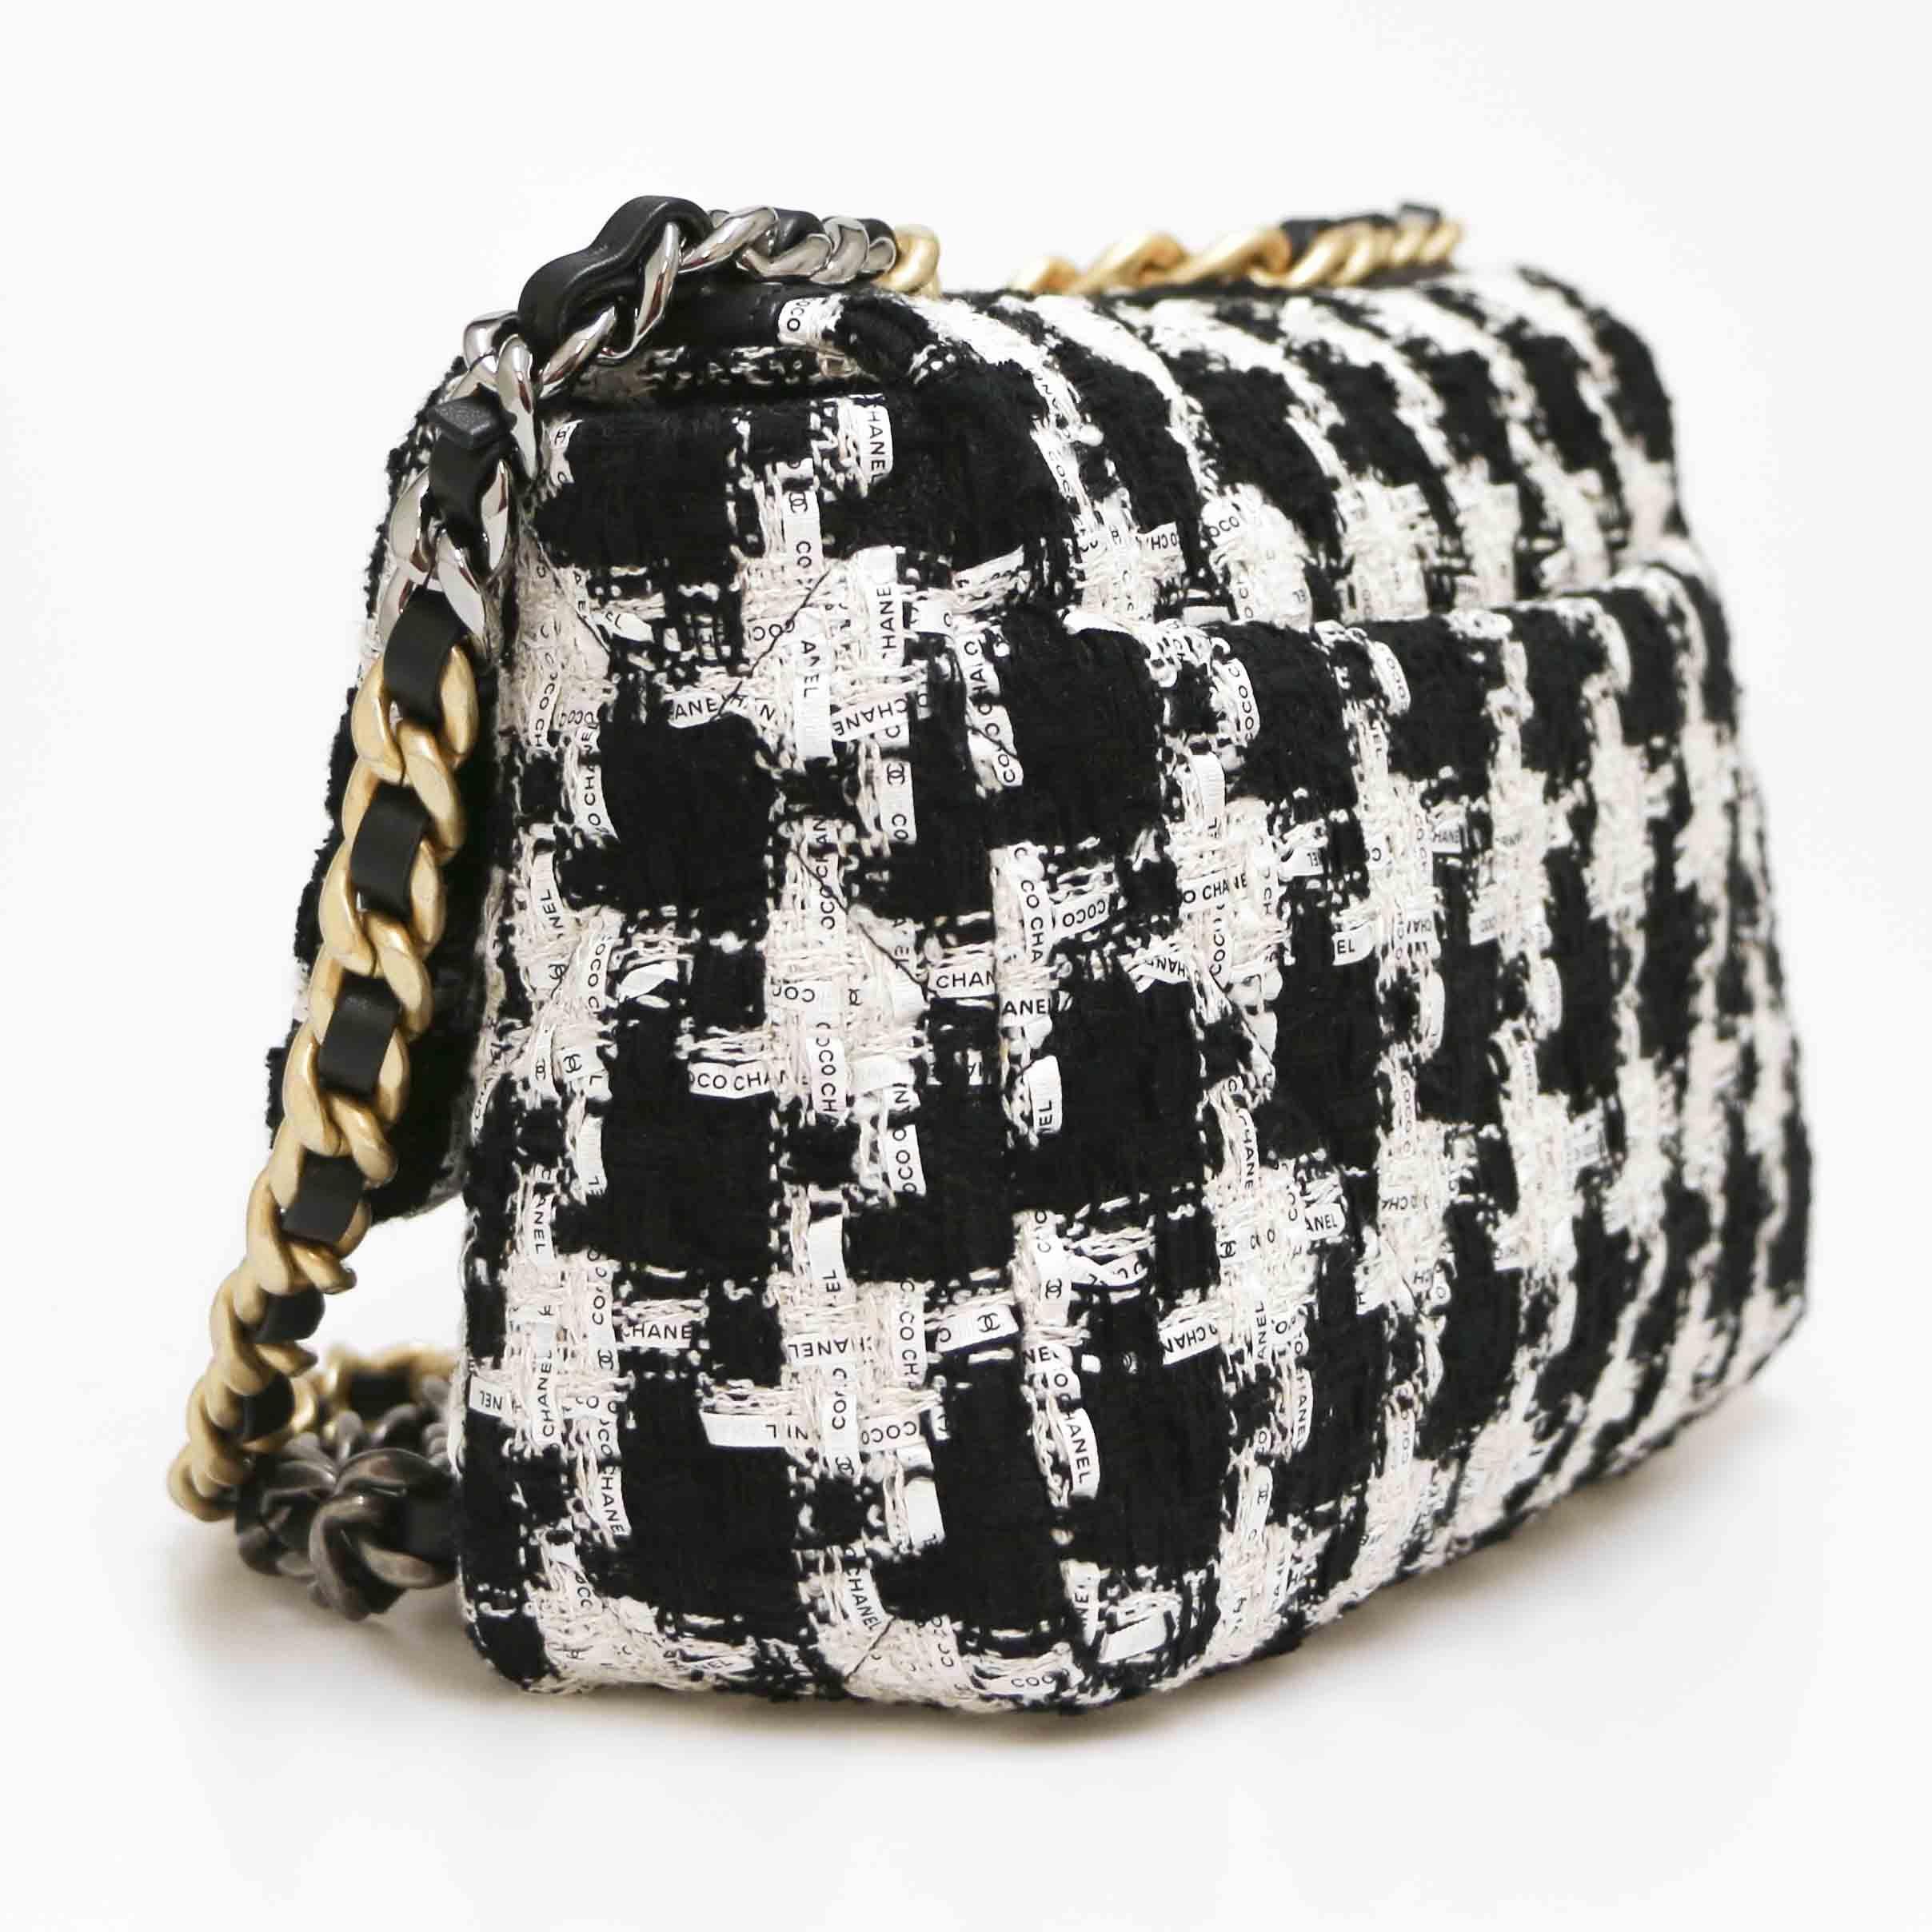 CHANEL 19 Bag in Two-tone Tweed 1